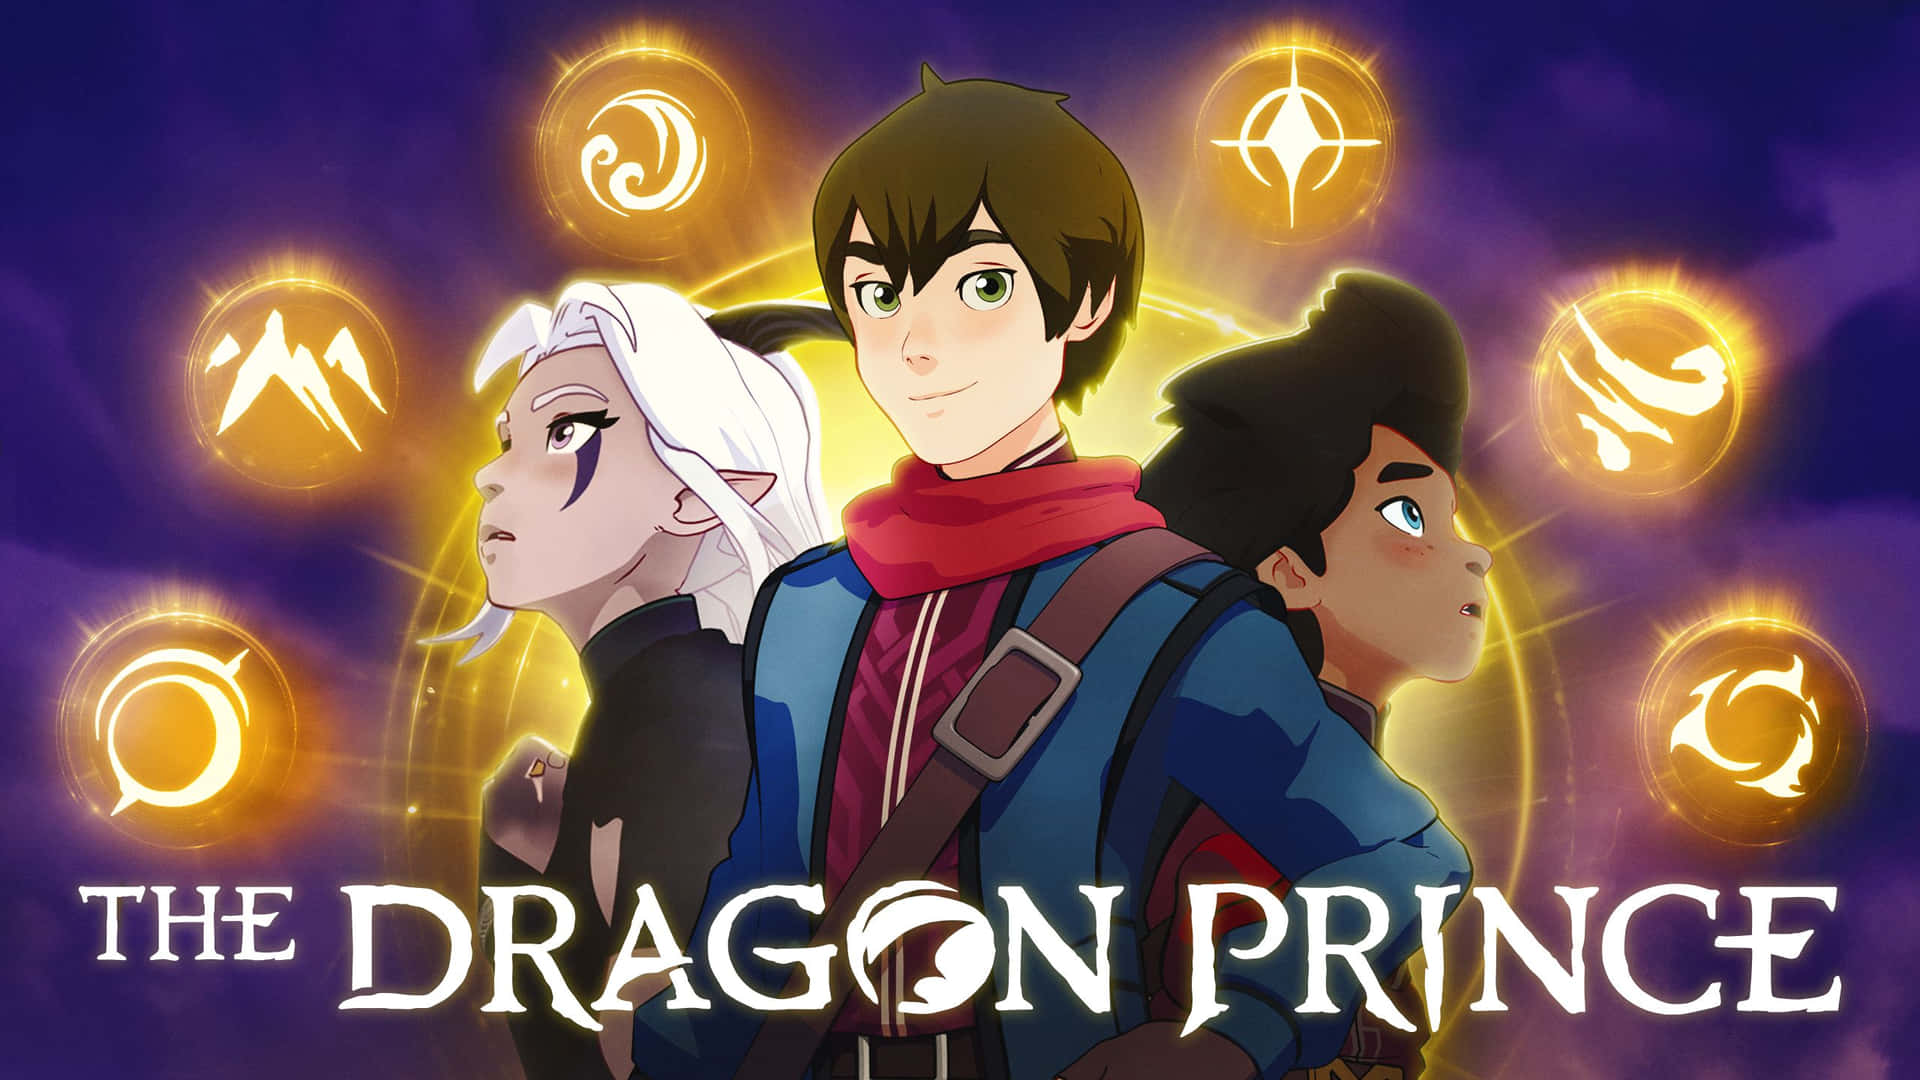 Two Mages and a Dragon Prince ready for battle Wallpaper